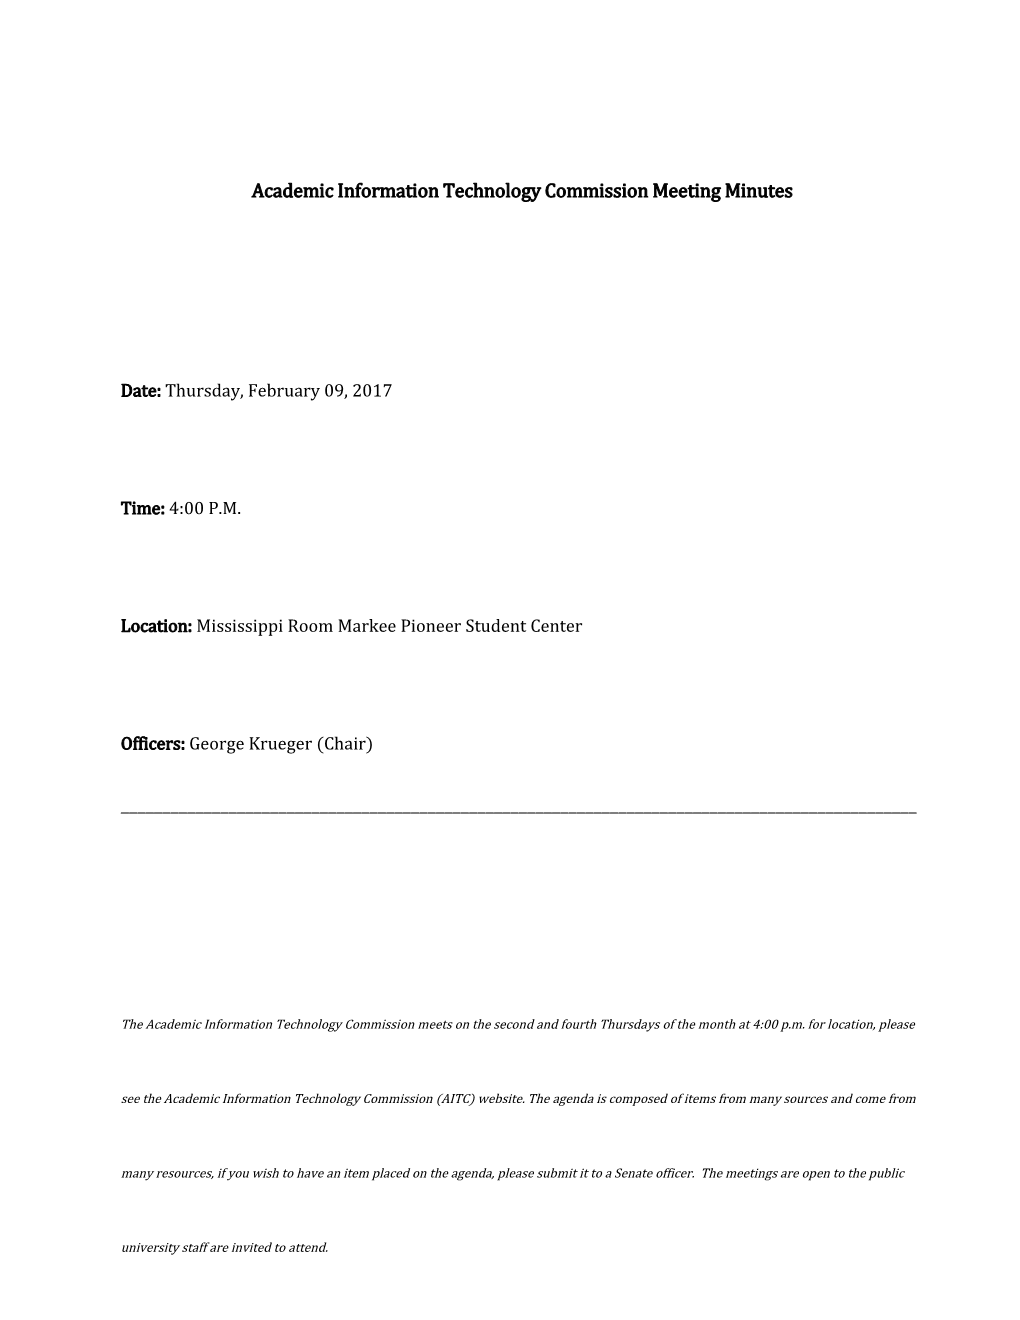 Academic Information Technology Commission Meeting Minutes s1